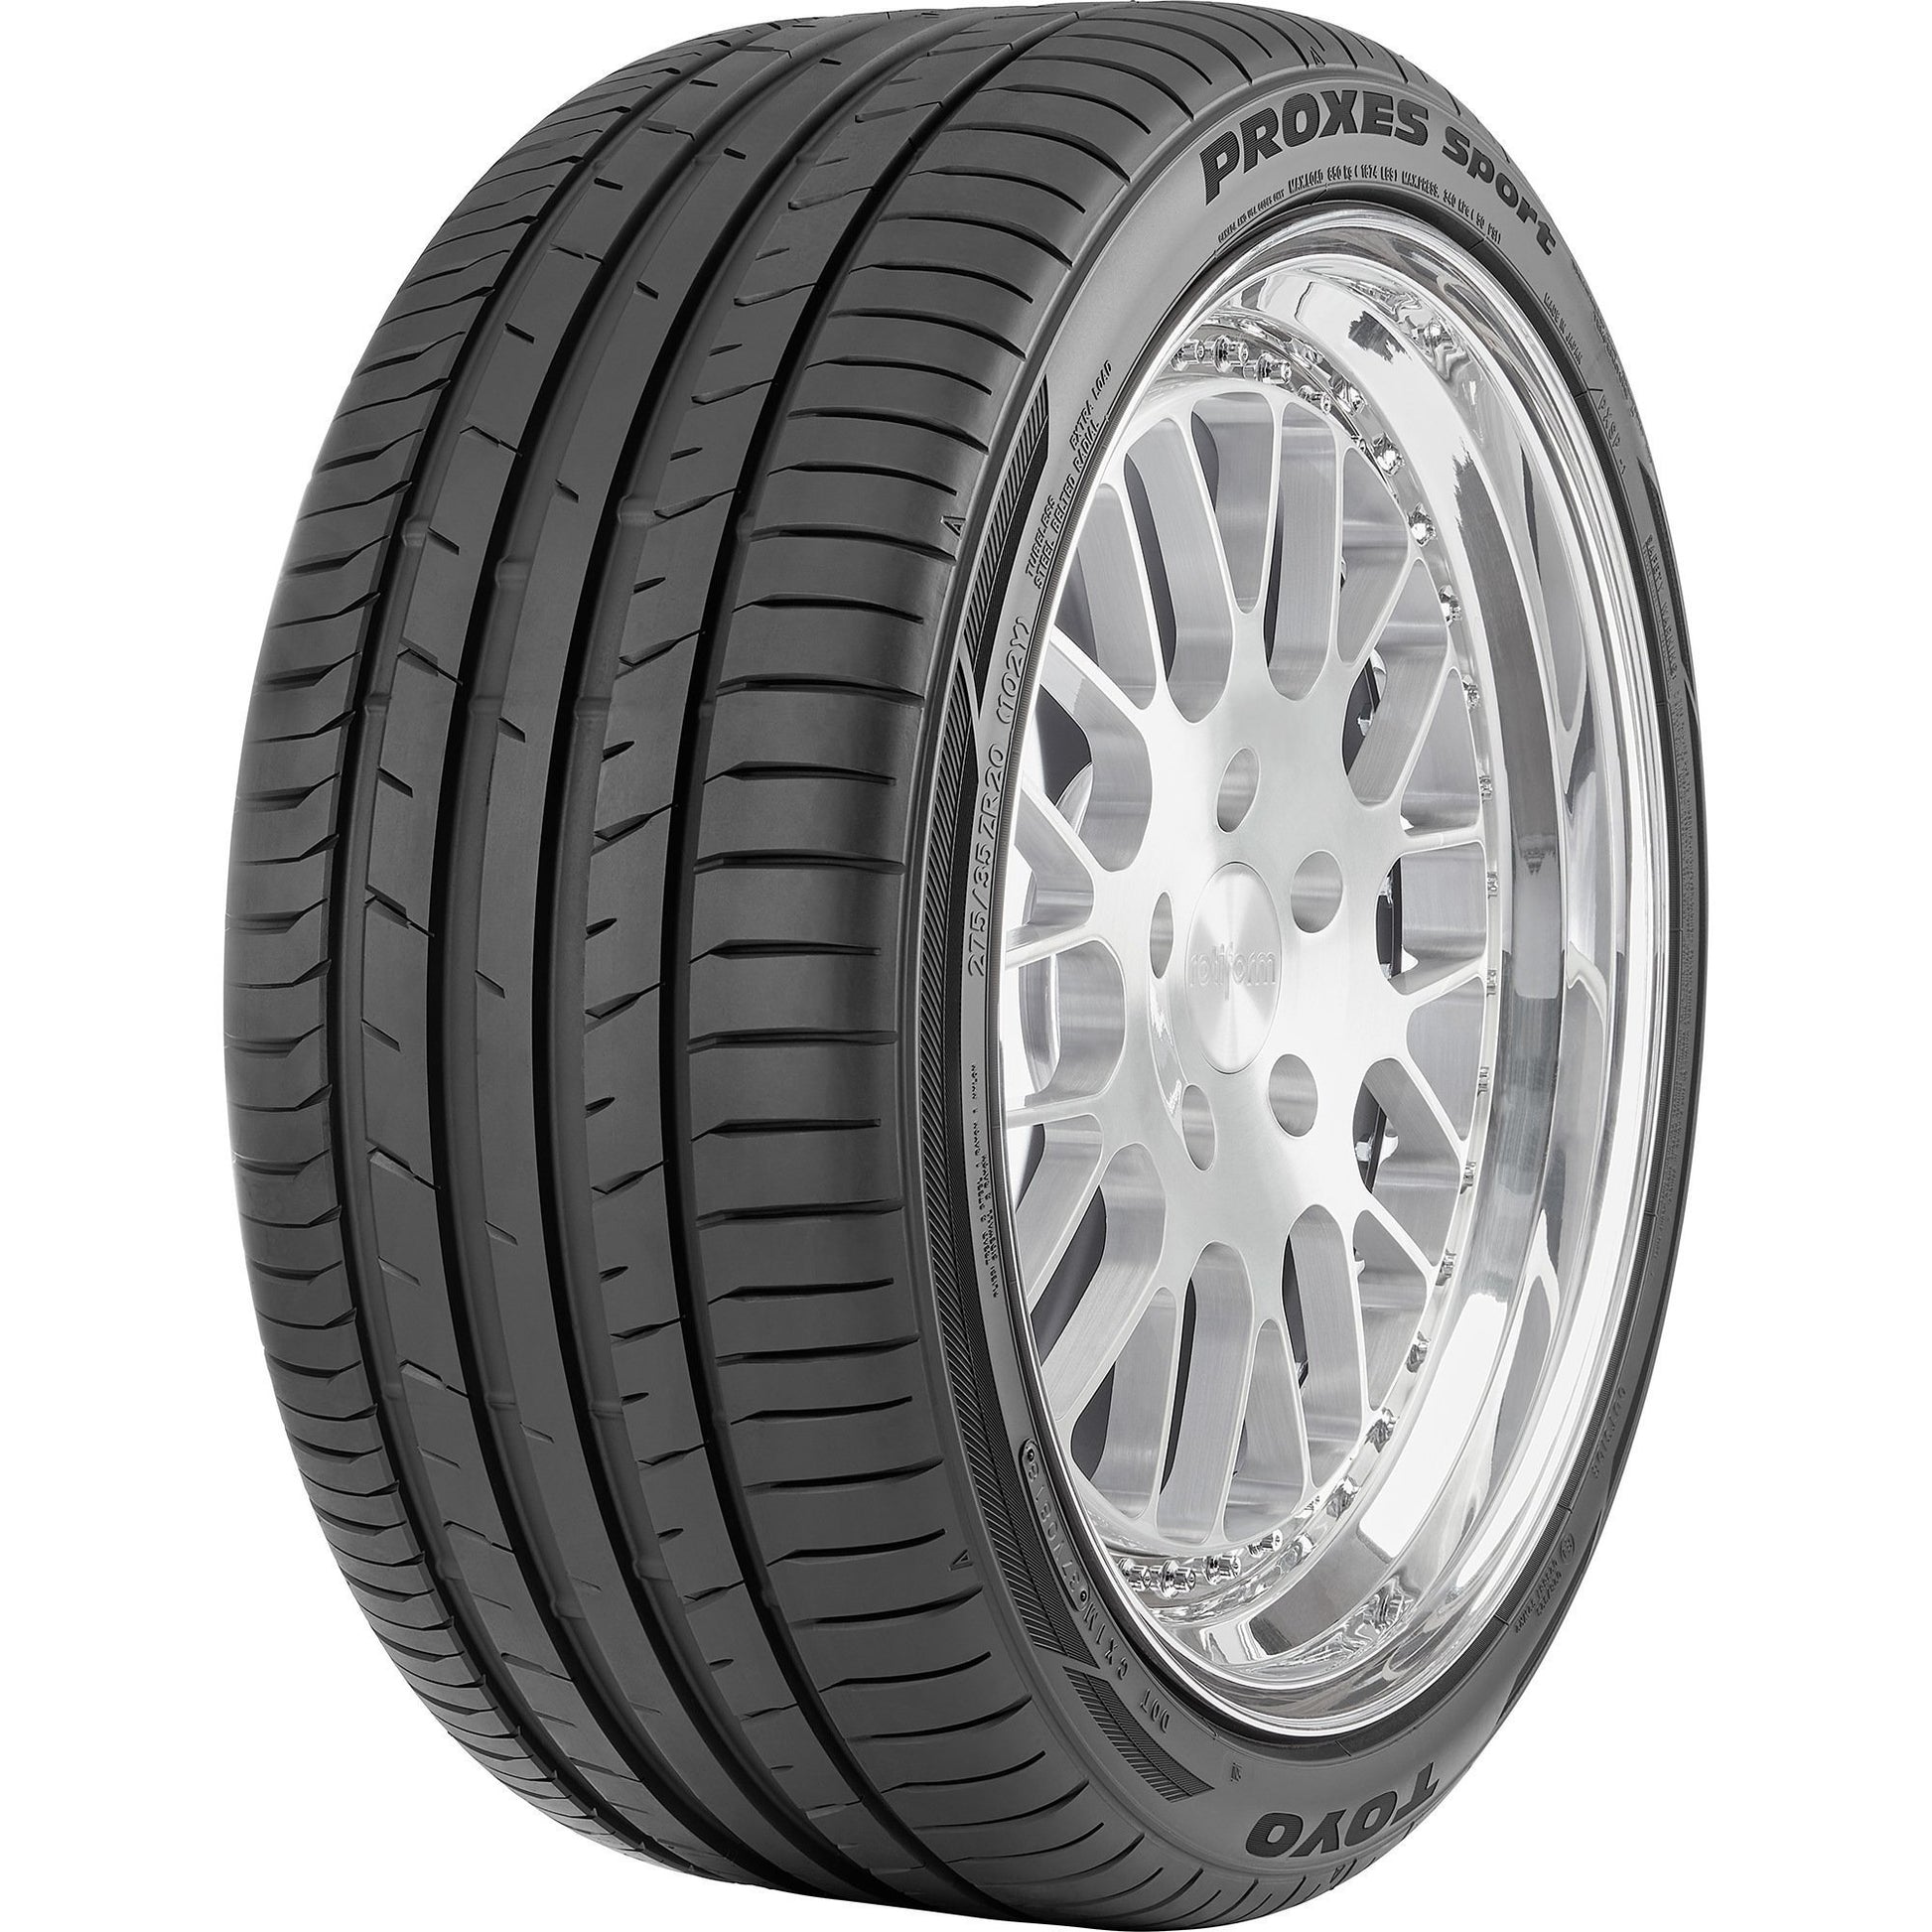 Toyo 255/40R19Xl 100Y Proxes Sport Tire - Universal (136770)-toy136770-136770-Tires-Toyo-255-40-19-JDMuscle